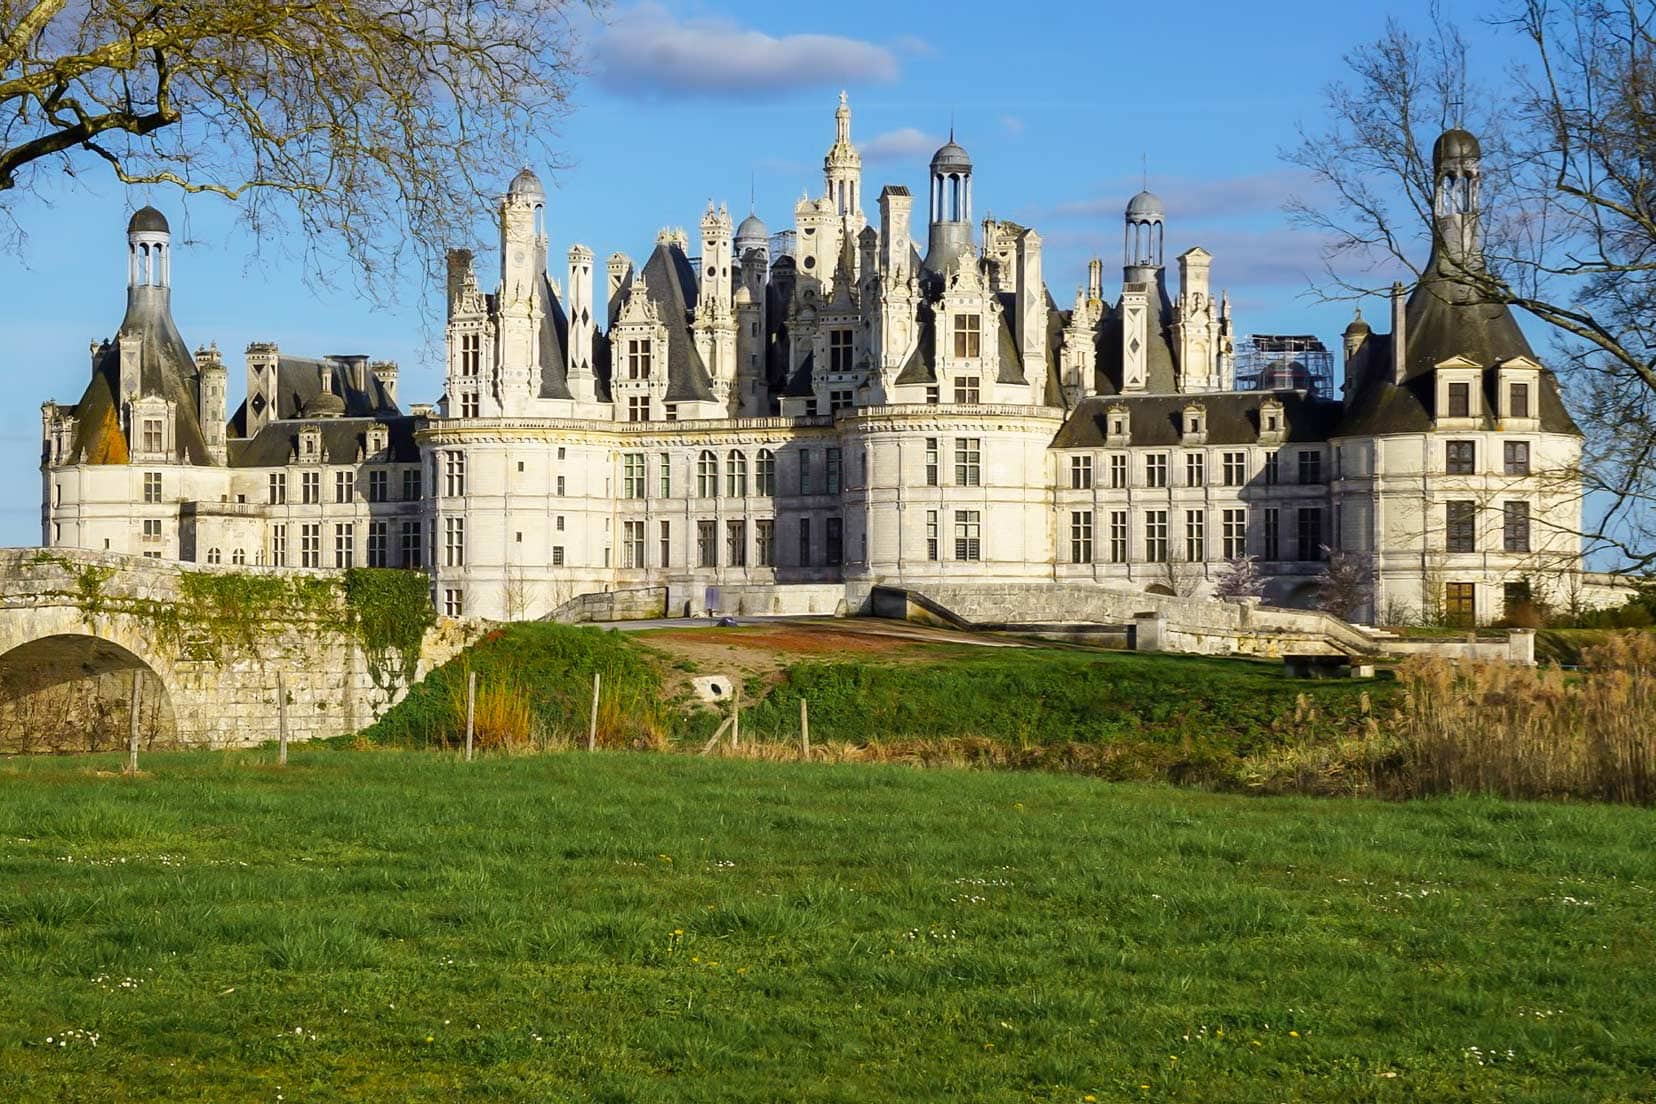 Chateaux de Chambord in the Loire Valley